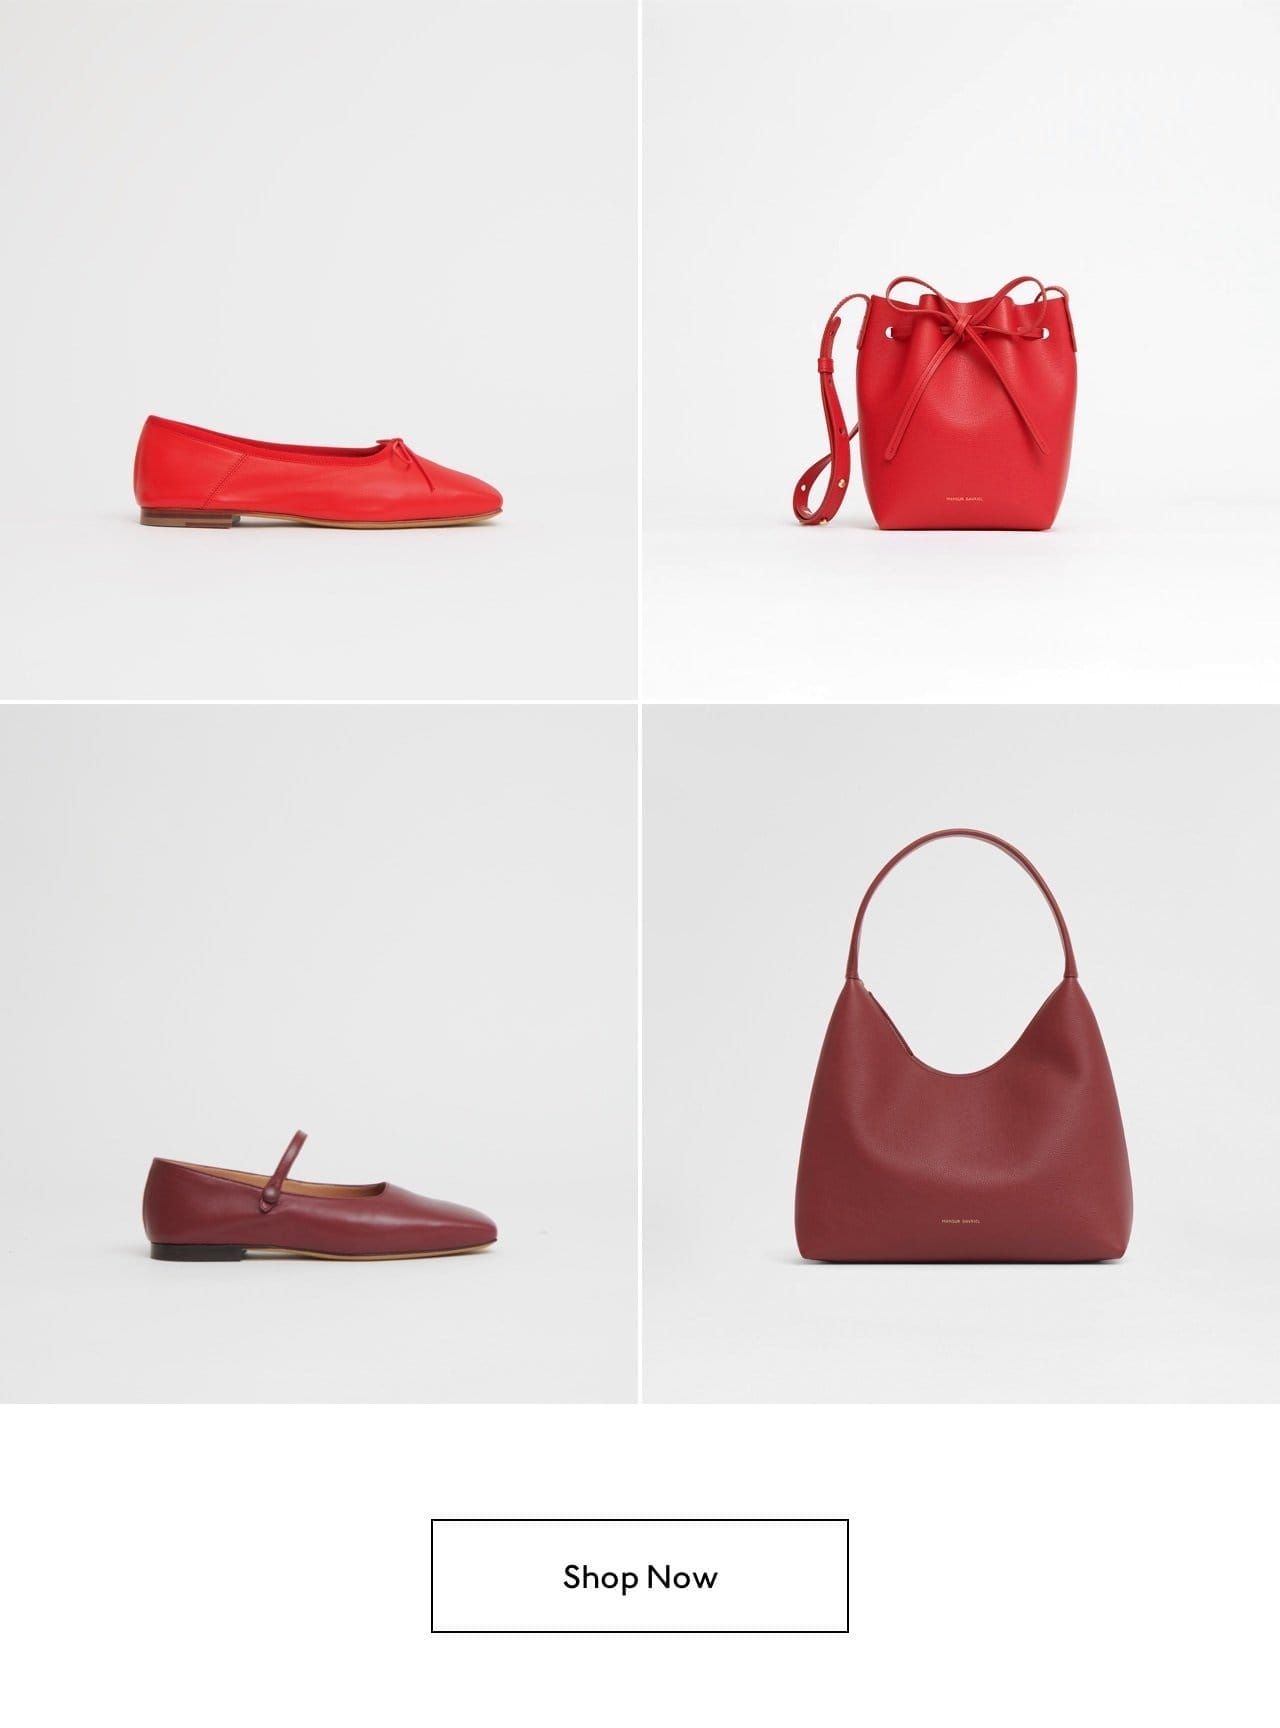 Pictured: bold red and claret bags and shoes paired together.